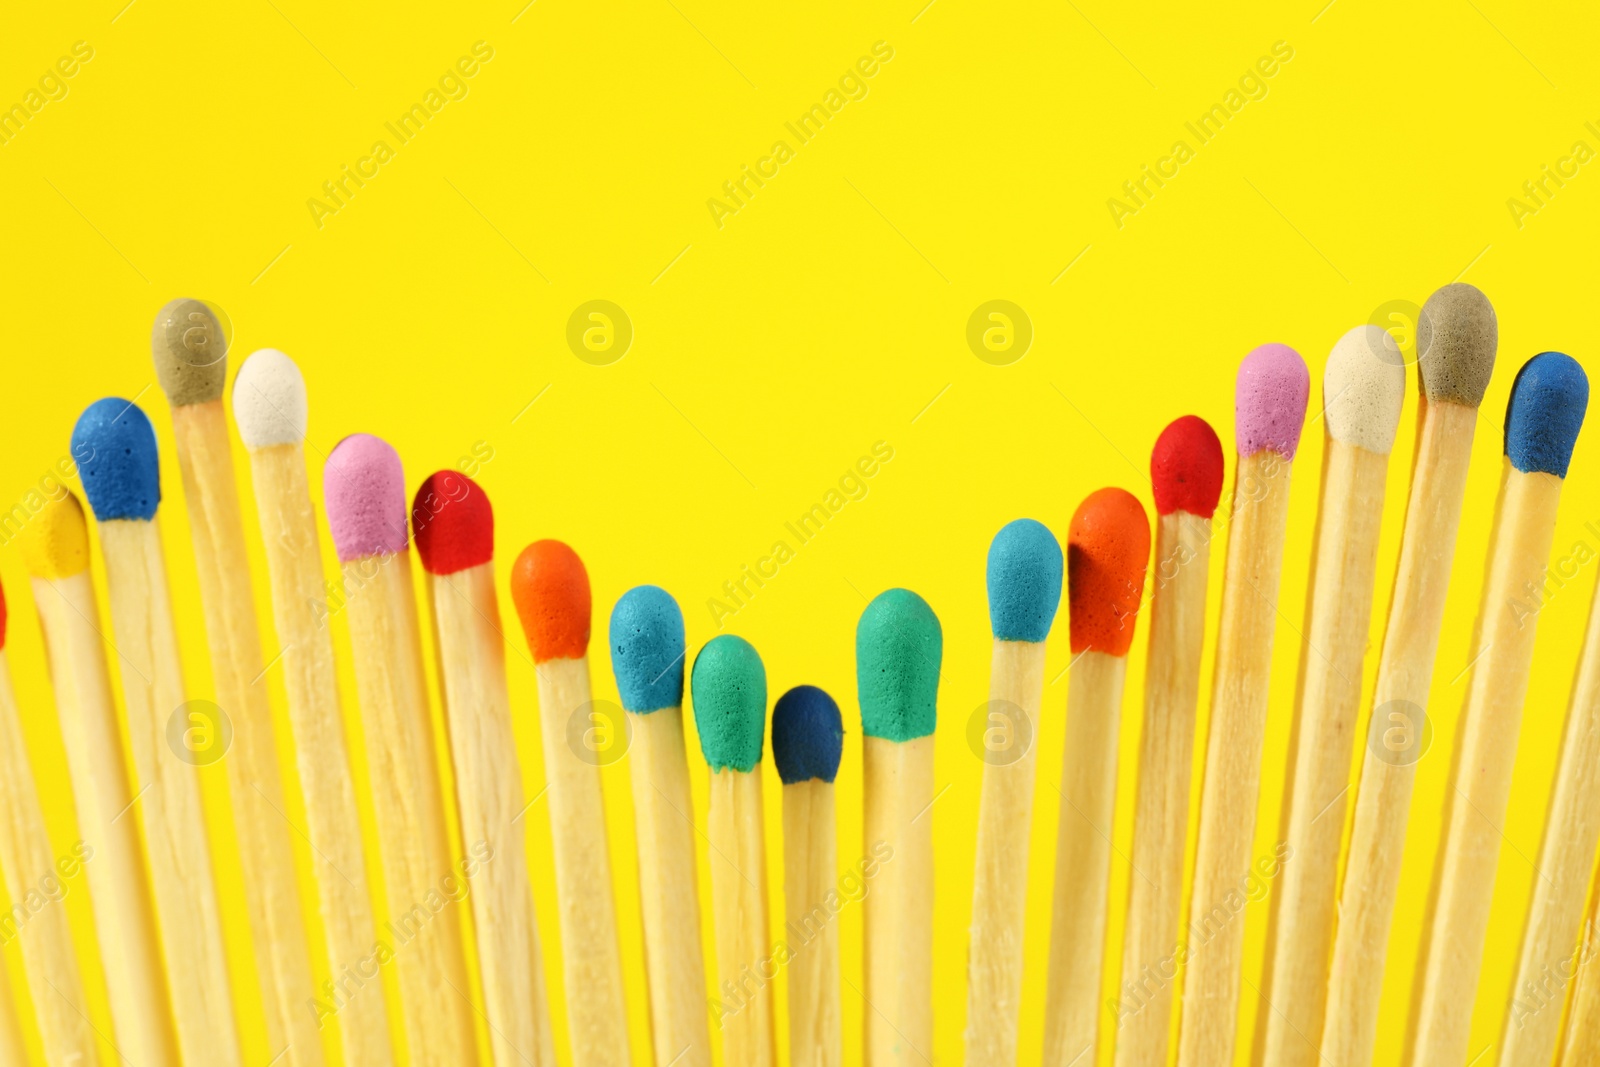 Photo of Matches with colorful heads on yellow background, closeup